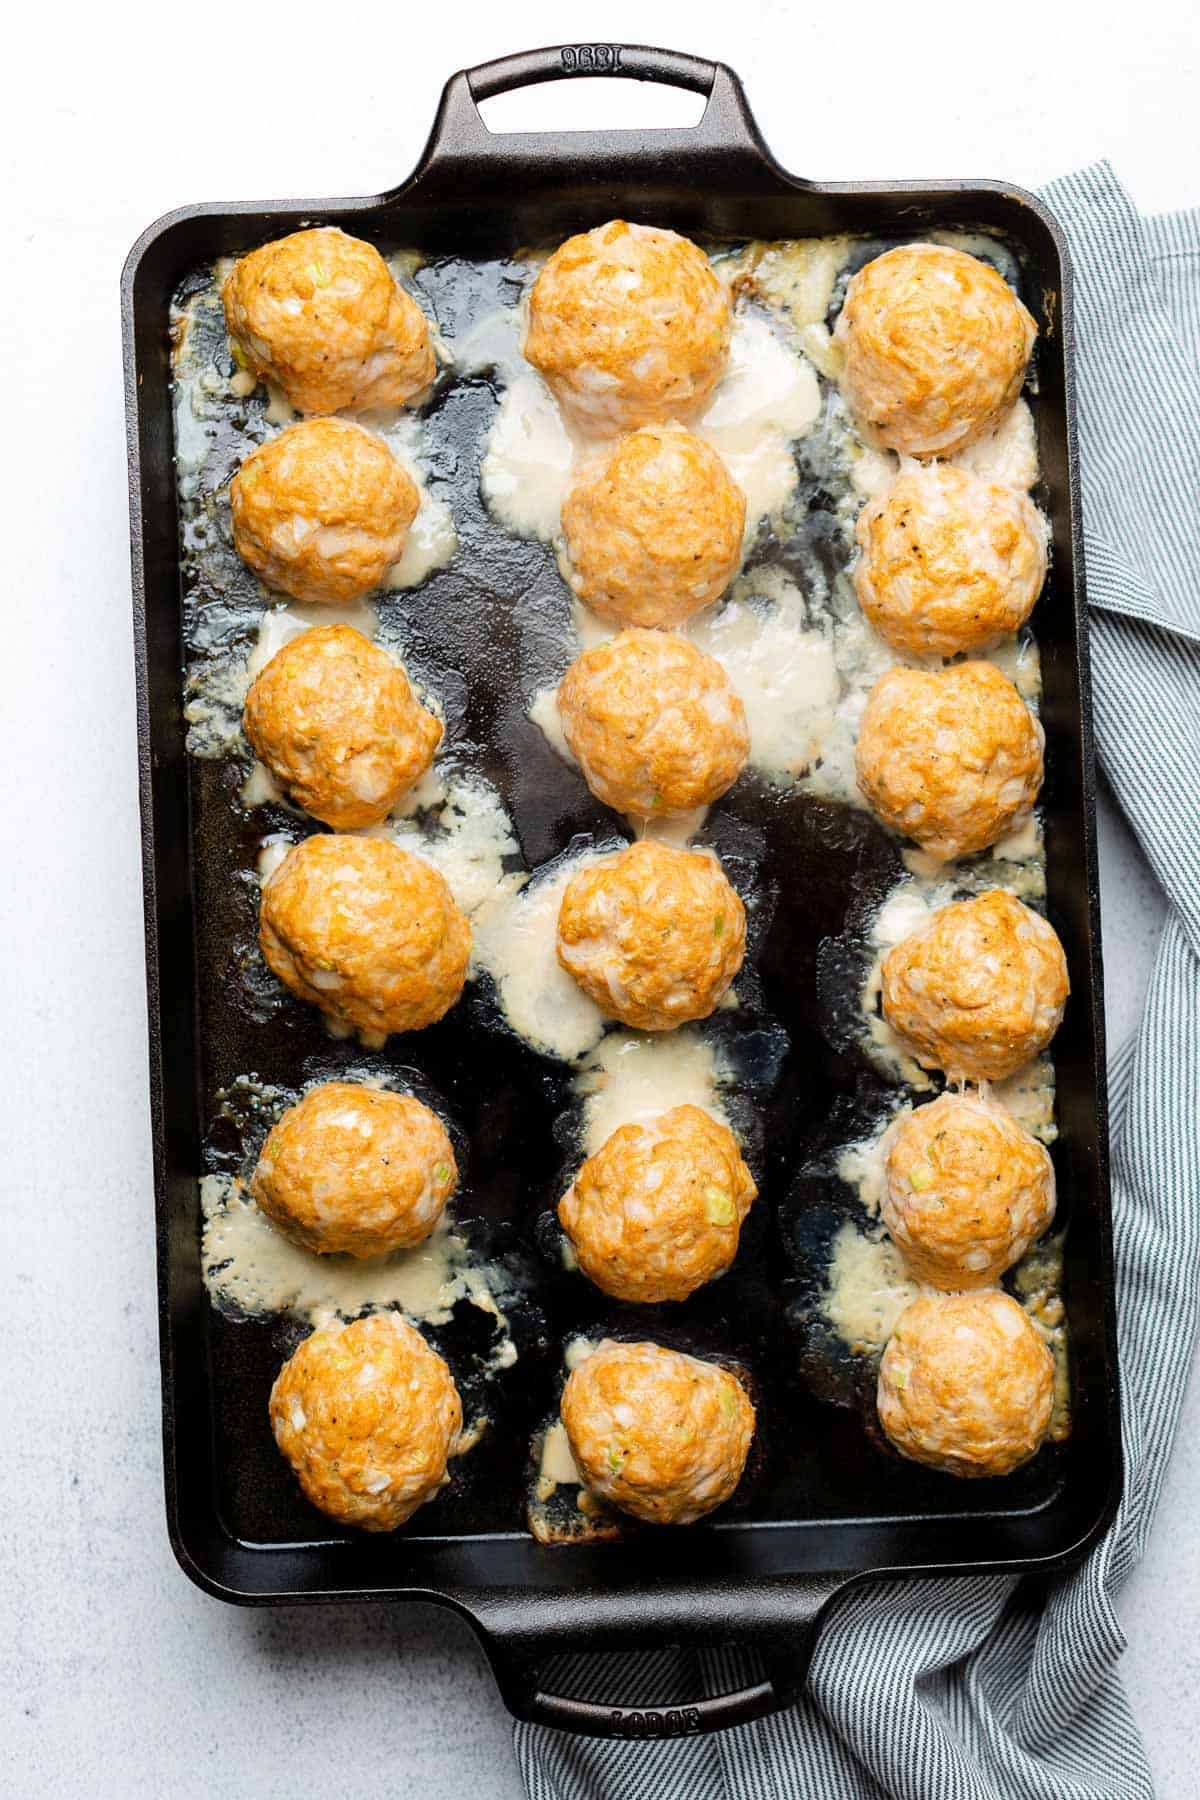 baked turkey meatballs on a bast iron baking sheet with pools of white fat